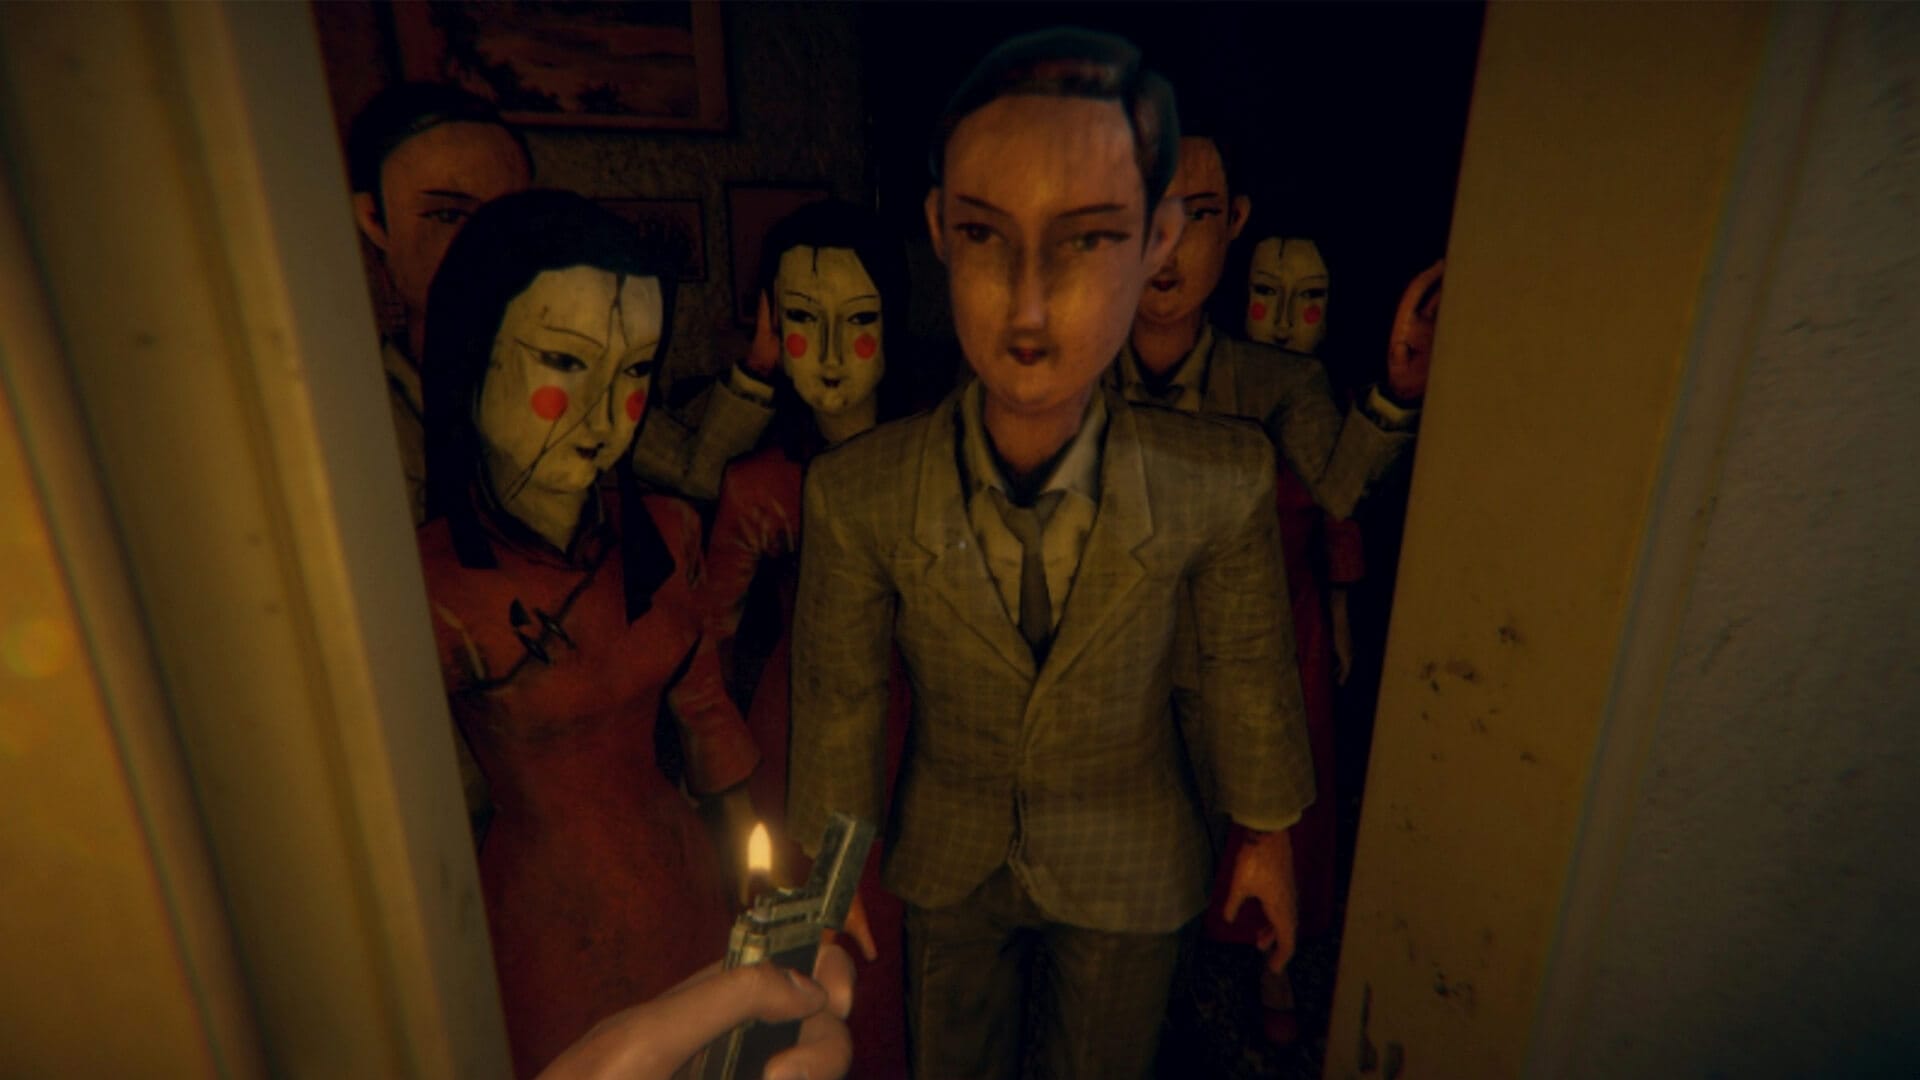 The main character holding a lighter up to some creepy dolls in Devotion